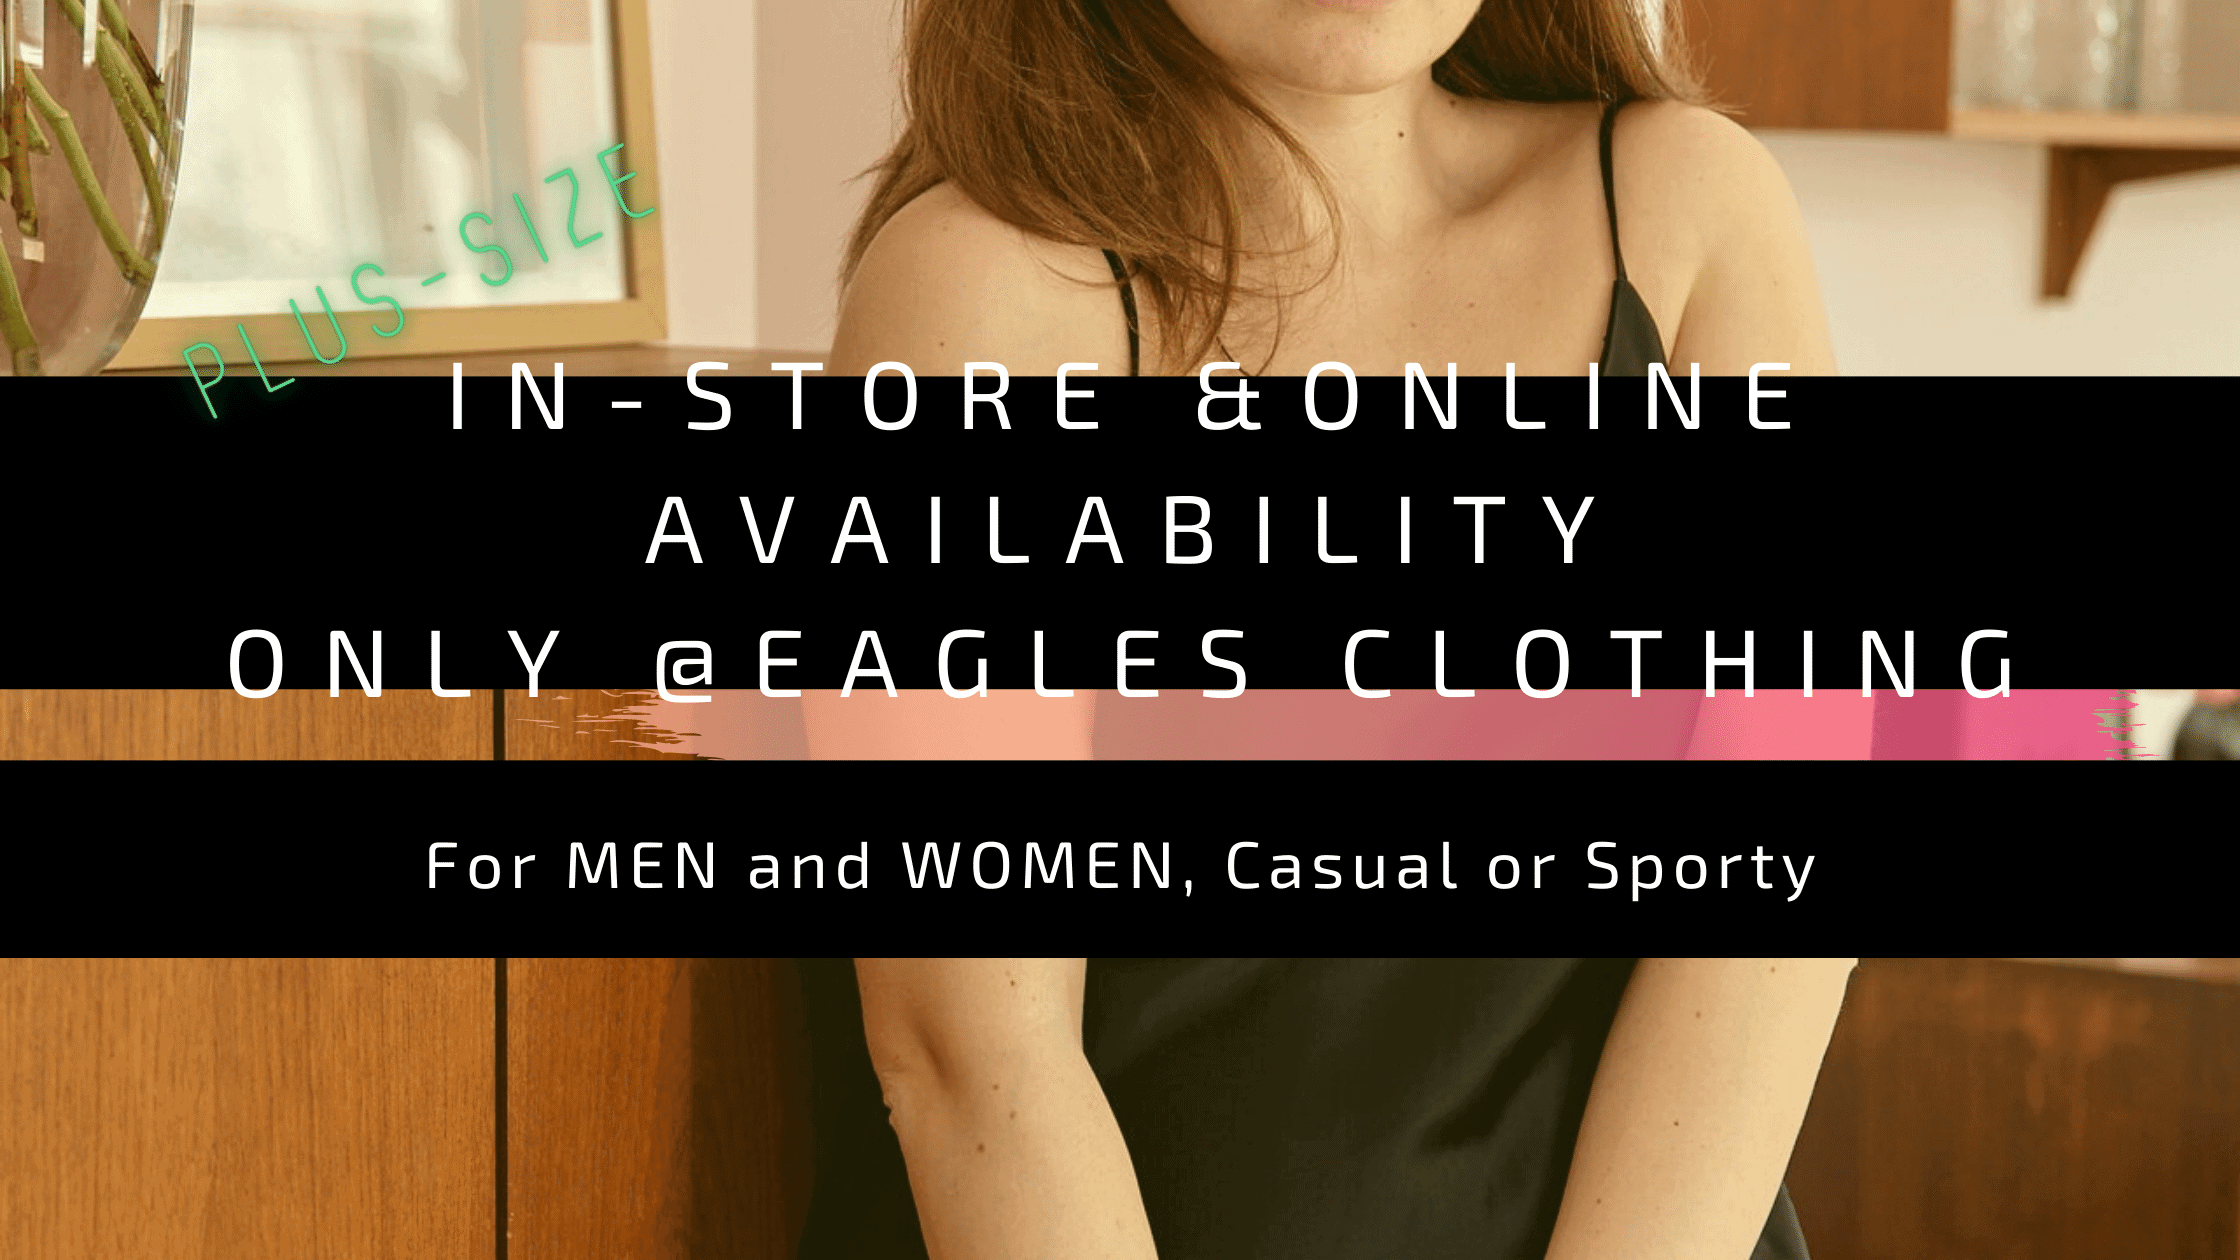 Plus-Sized Men and Women go here to get Essential Clothing with Physical  Stores